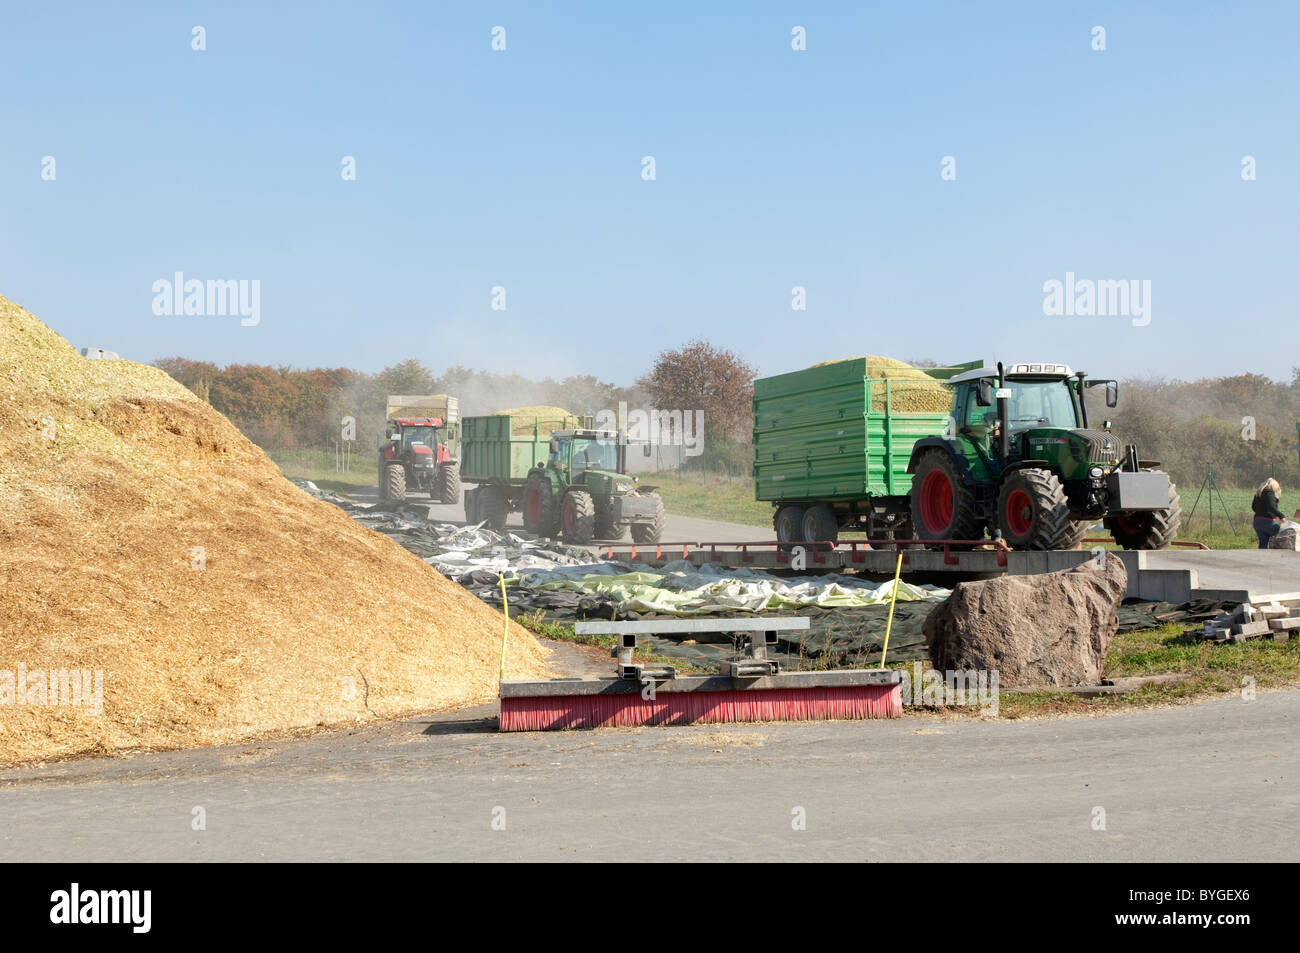 Maize, Corn (Zea mays). Fresh chopped maize being brought to an anaerobic digester plant. Stock Photo